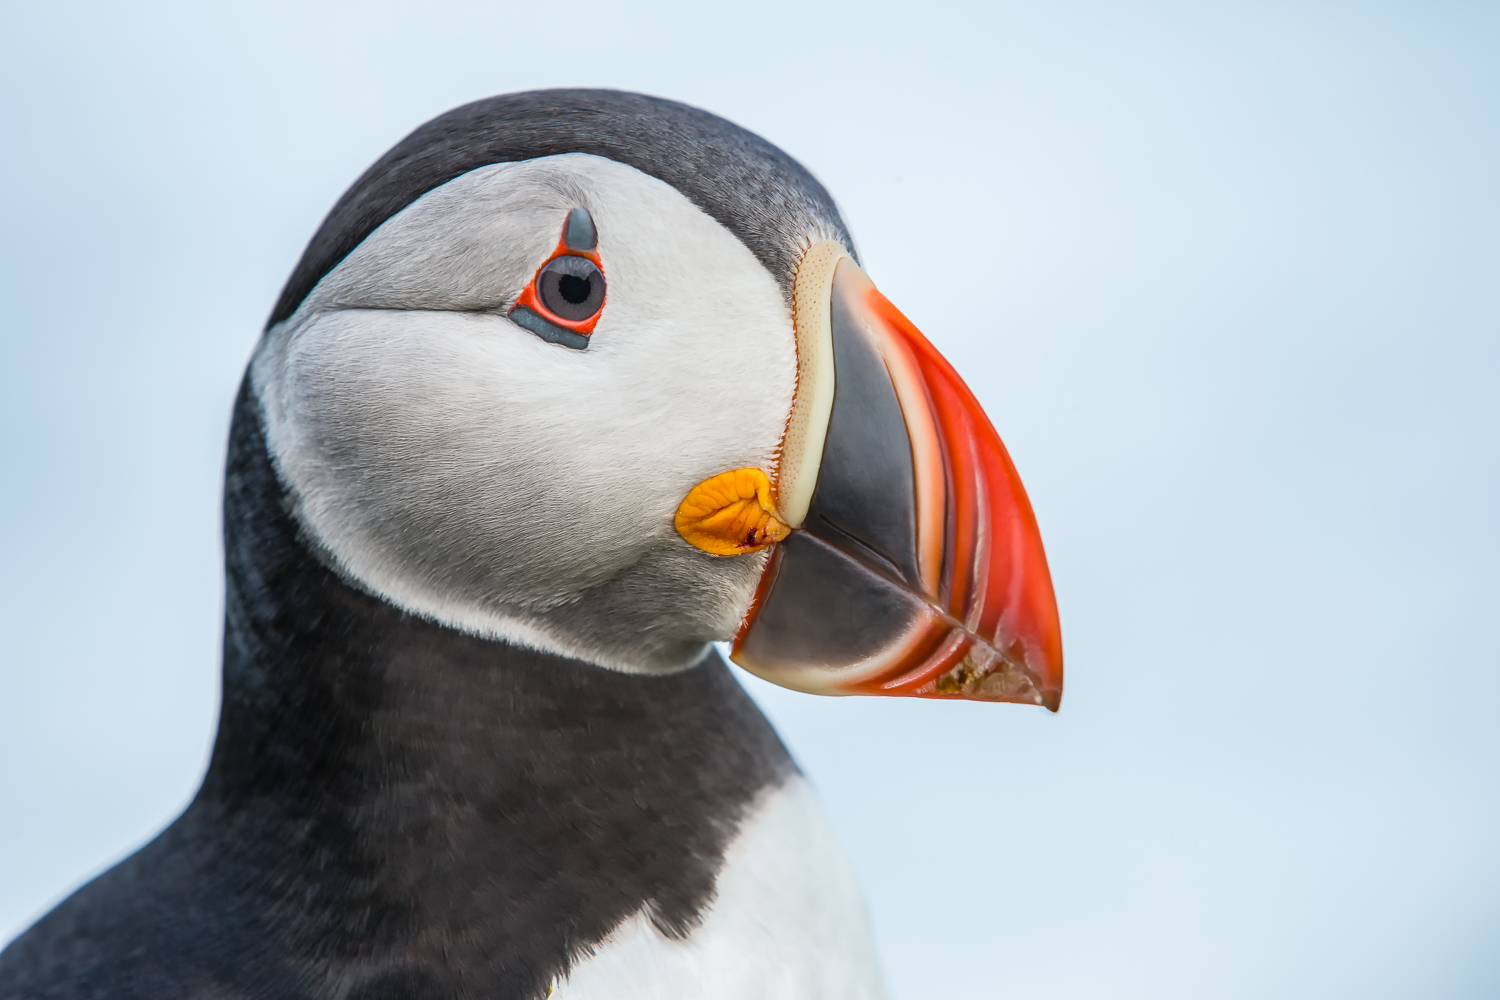 Iceland_Puffin